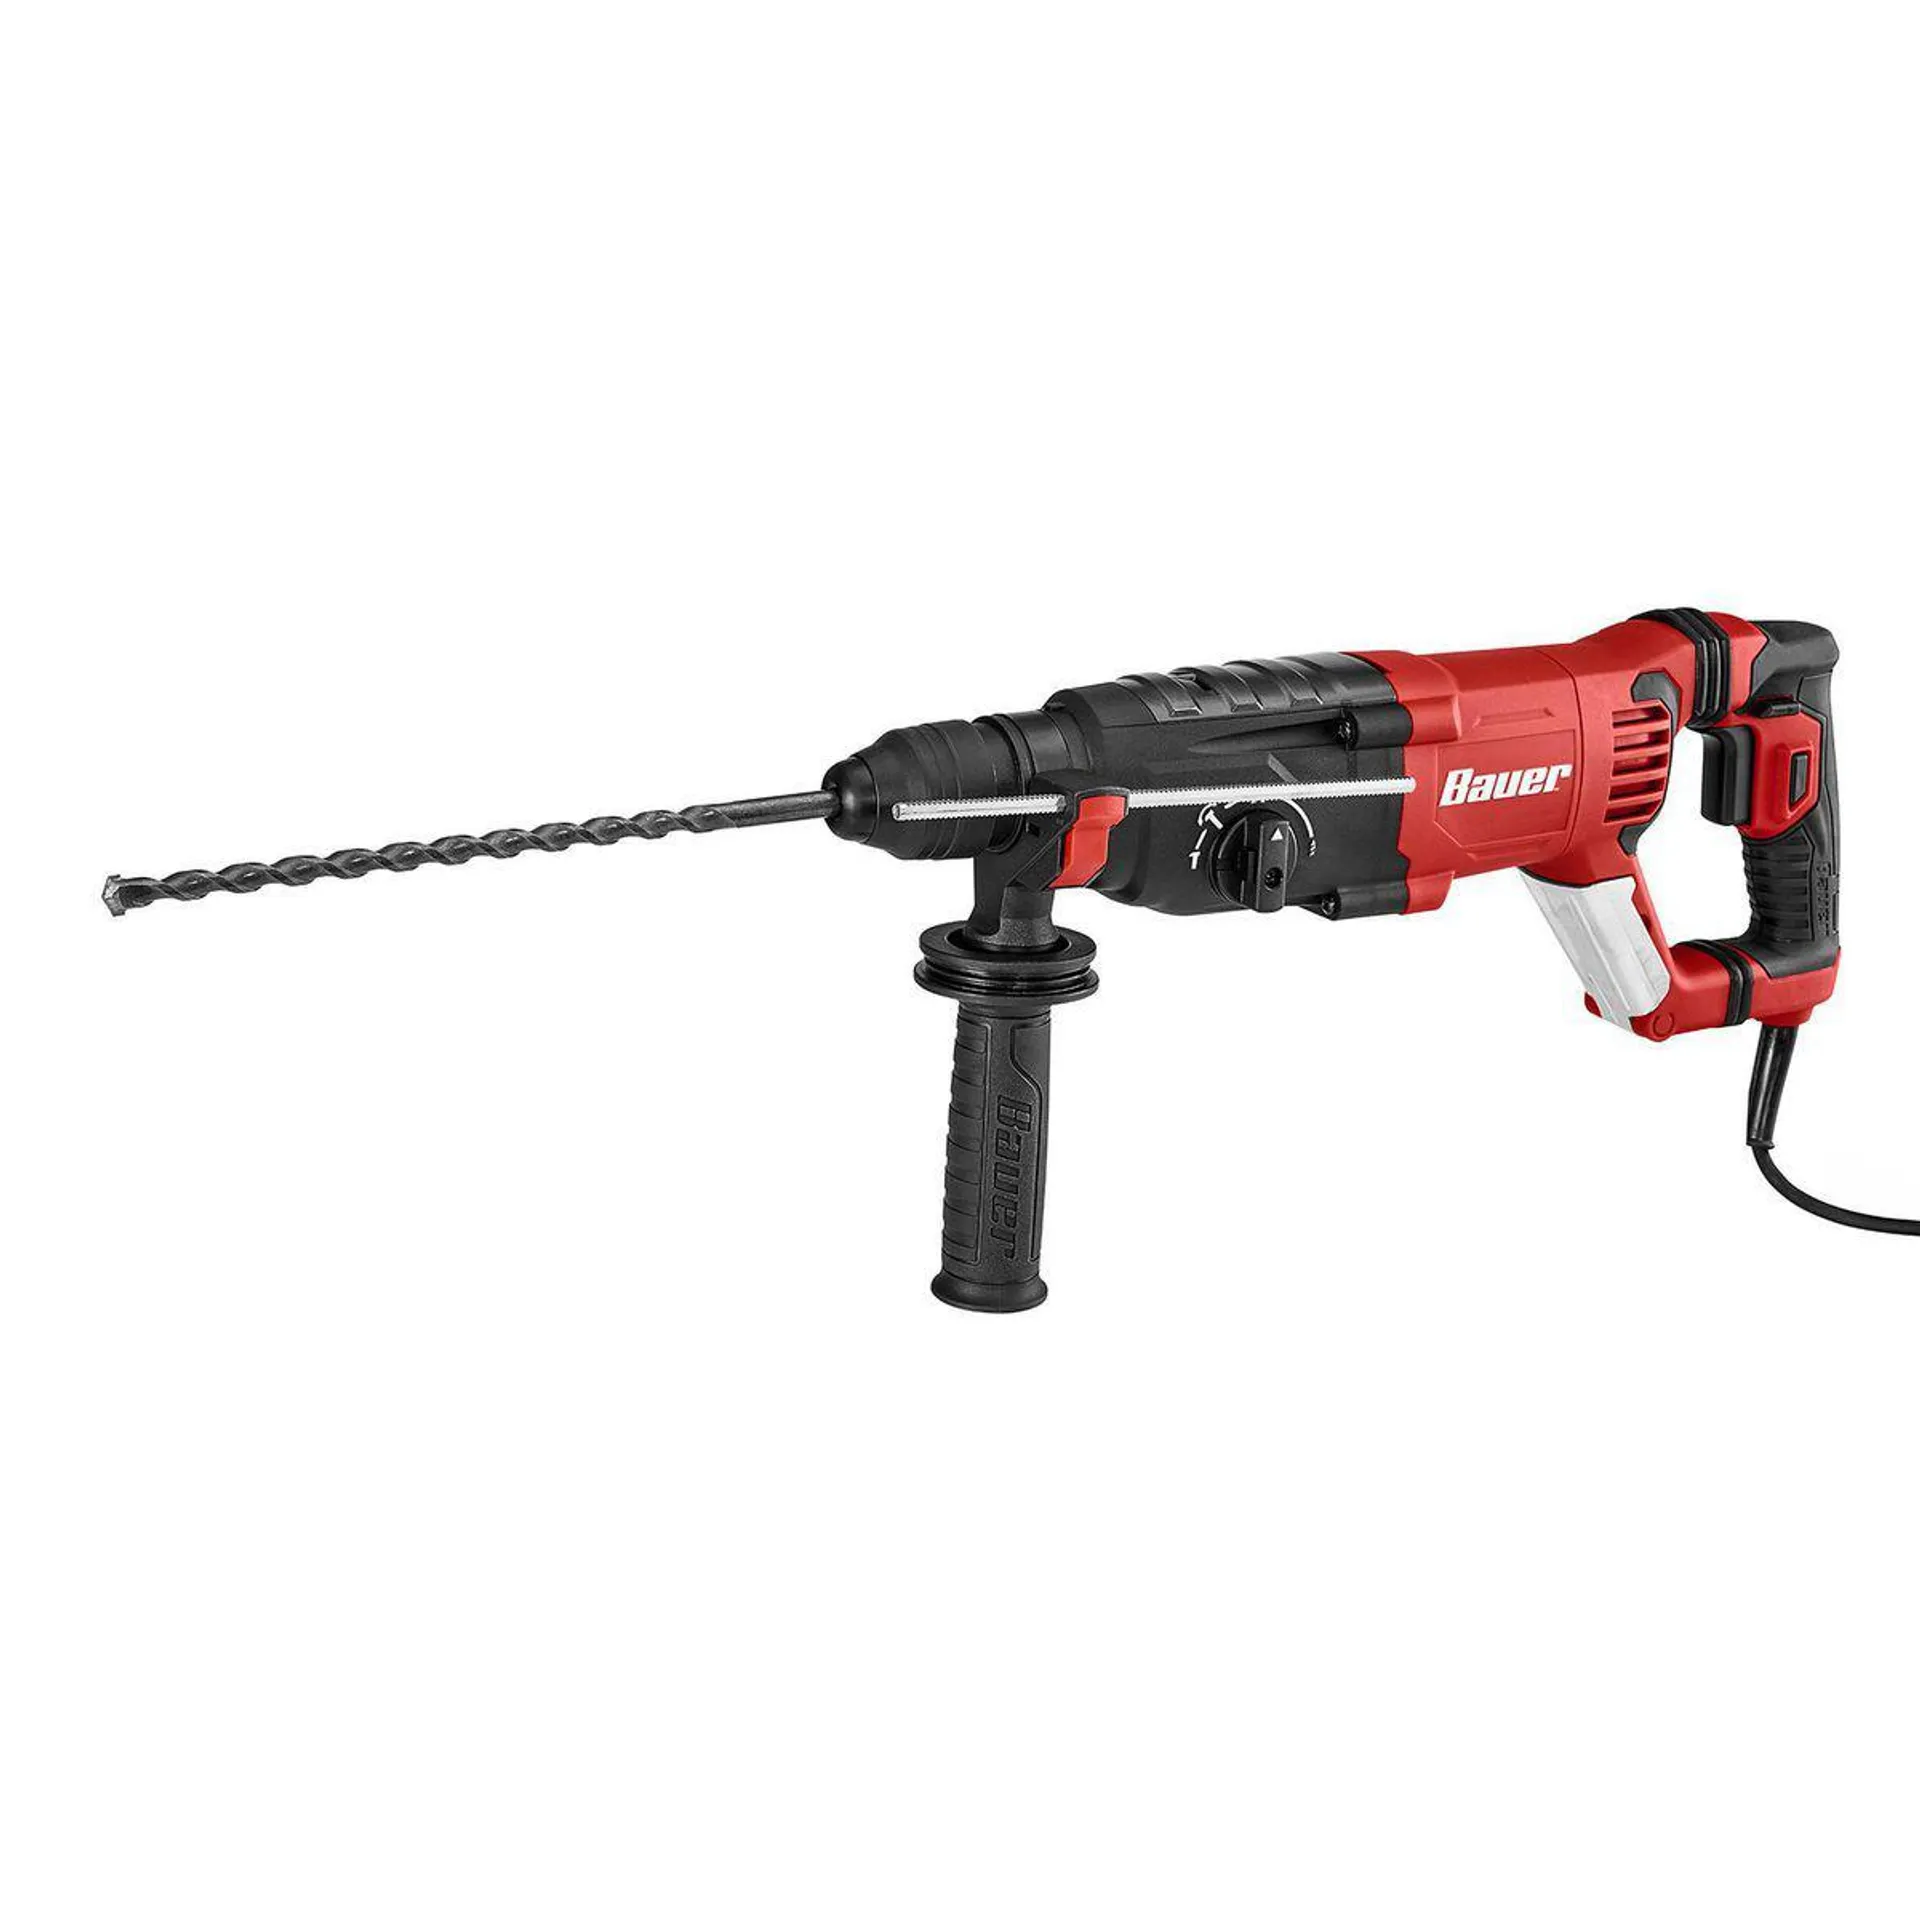 8.5 Amp, 1 in. SDS-PLUS Type Variable-Speed Rotary Hammer